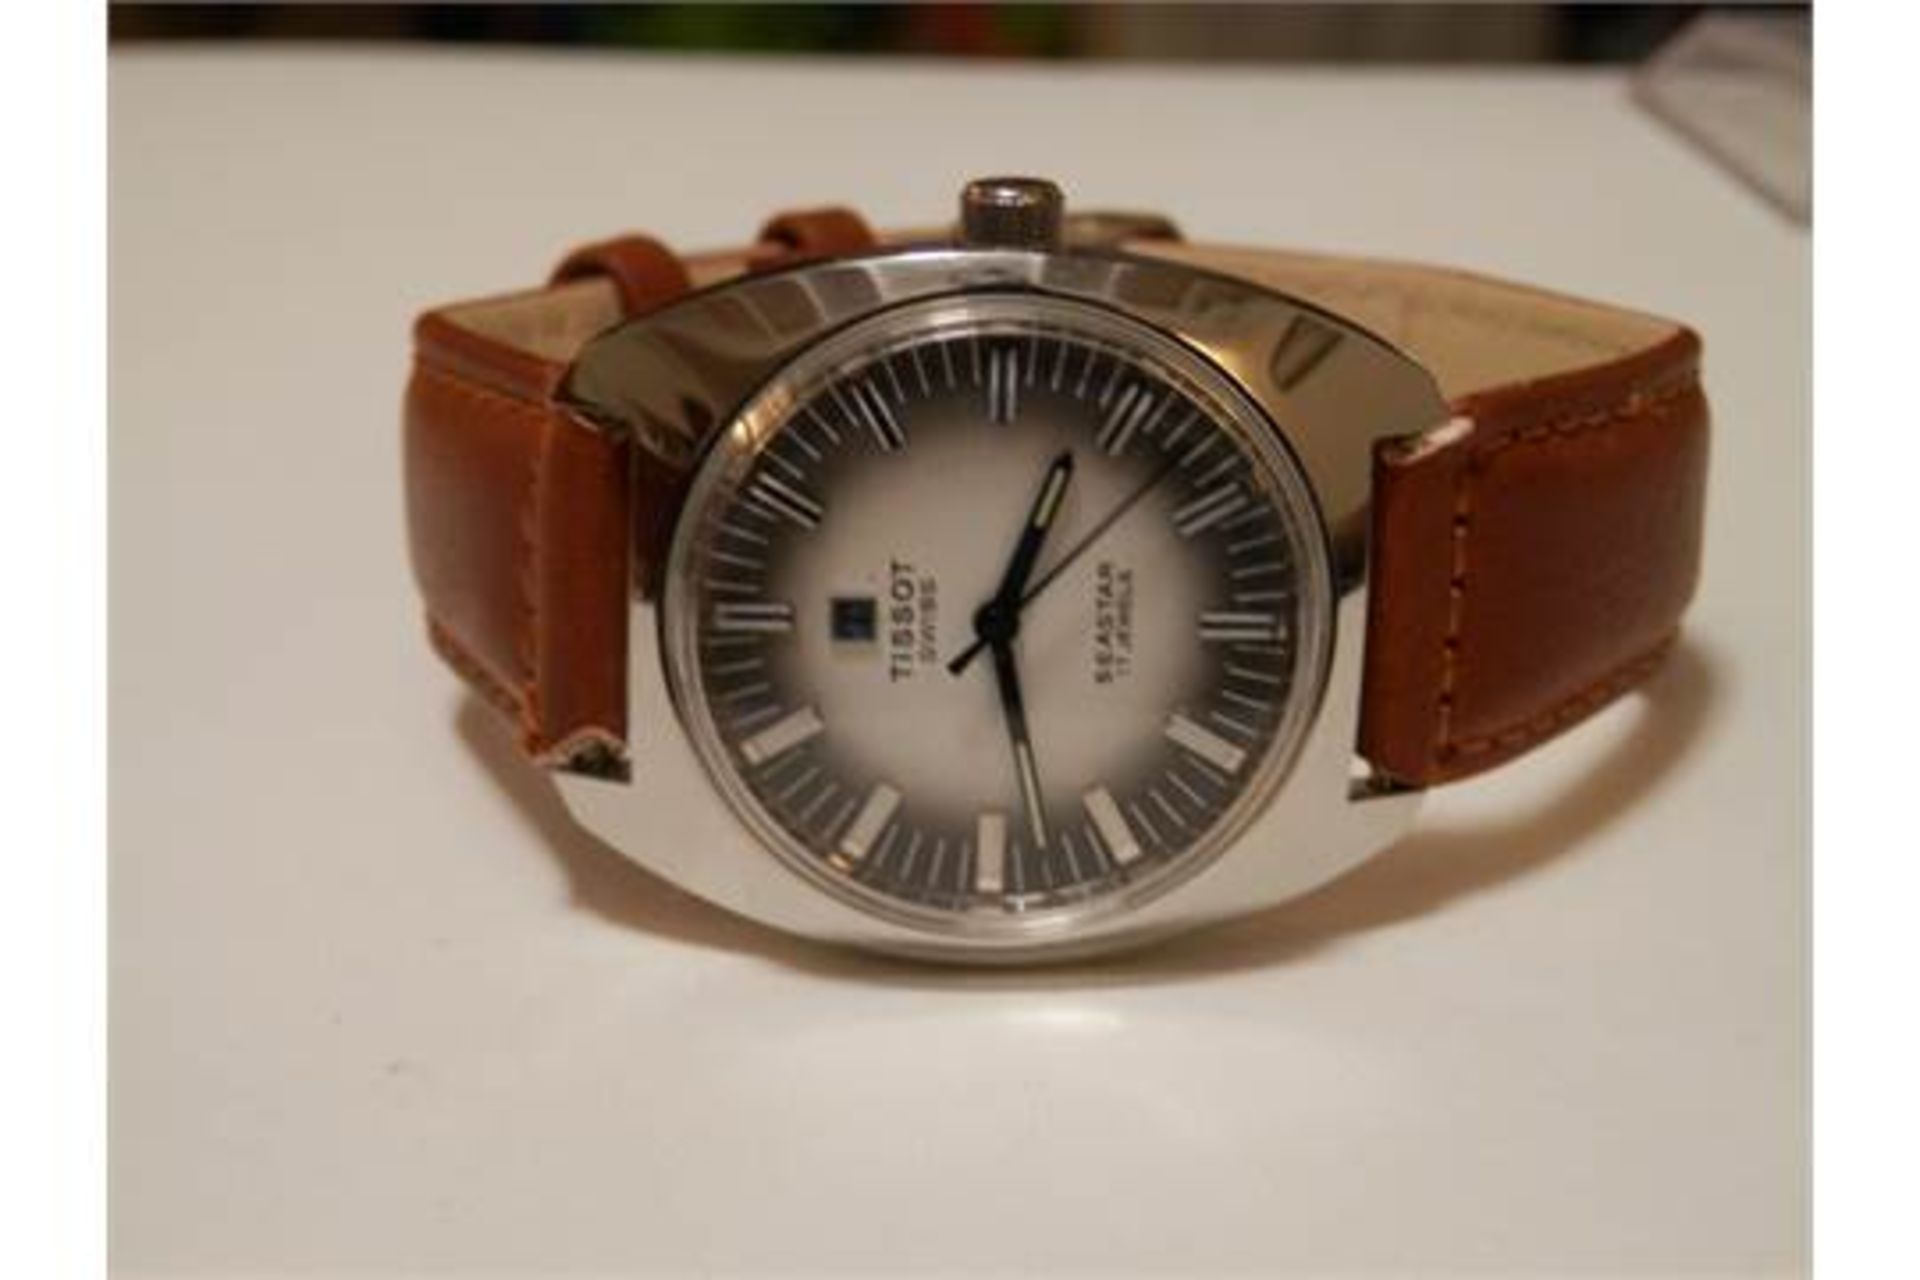 SUPERB GENTS TISSOT SEASTAR, POSSIBLY NEW/OLD STOCK 1970S 17 JEWEL SWISS WATCH (1 of 3 available) - Image 4 of 10